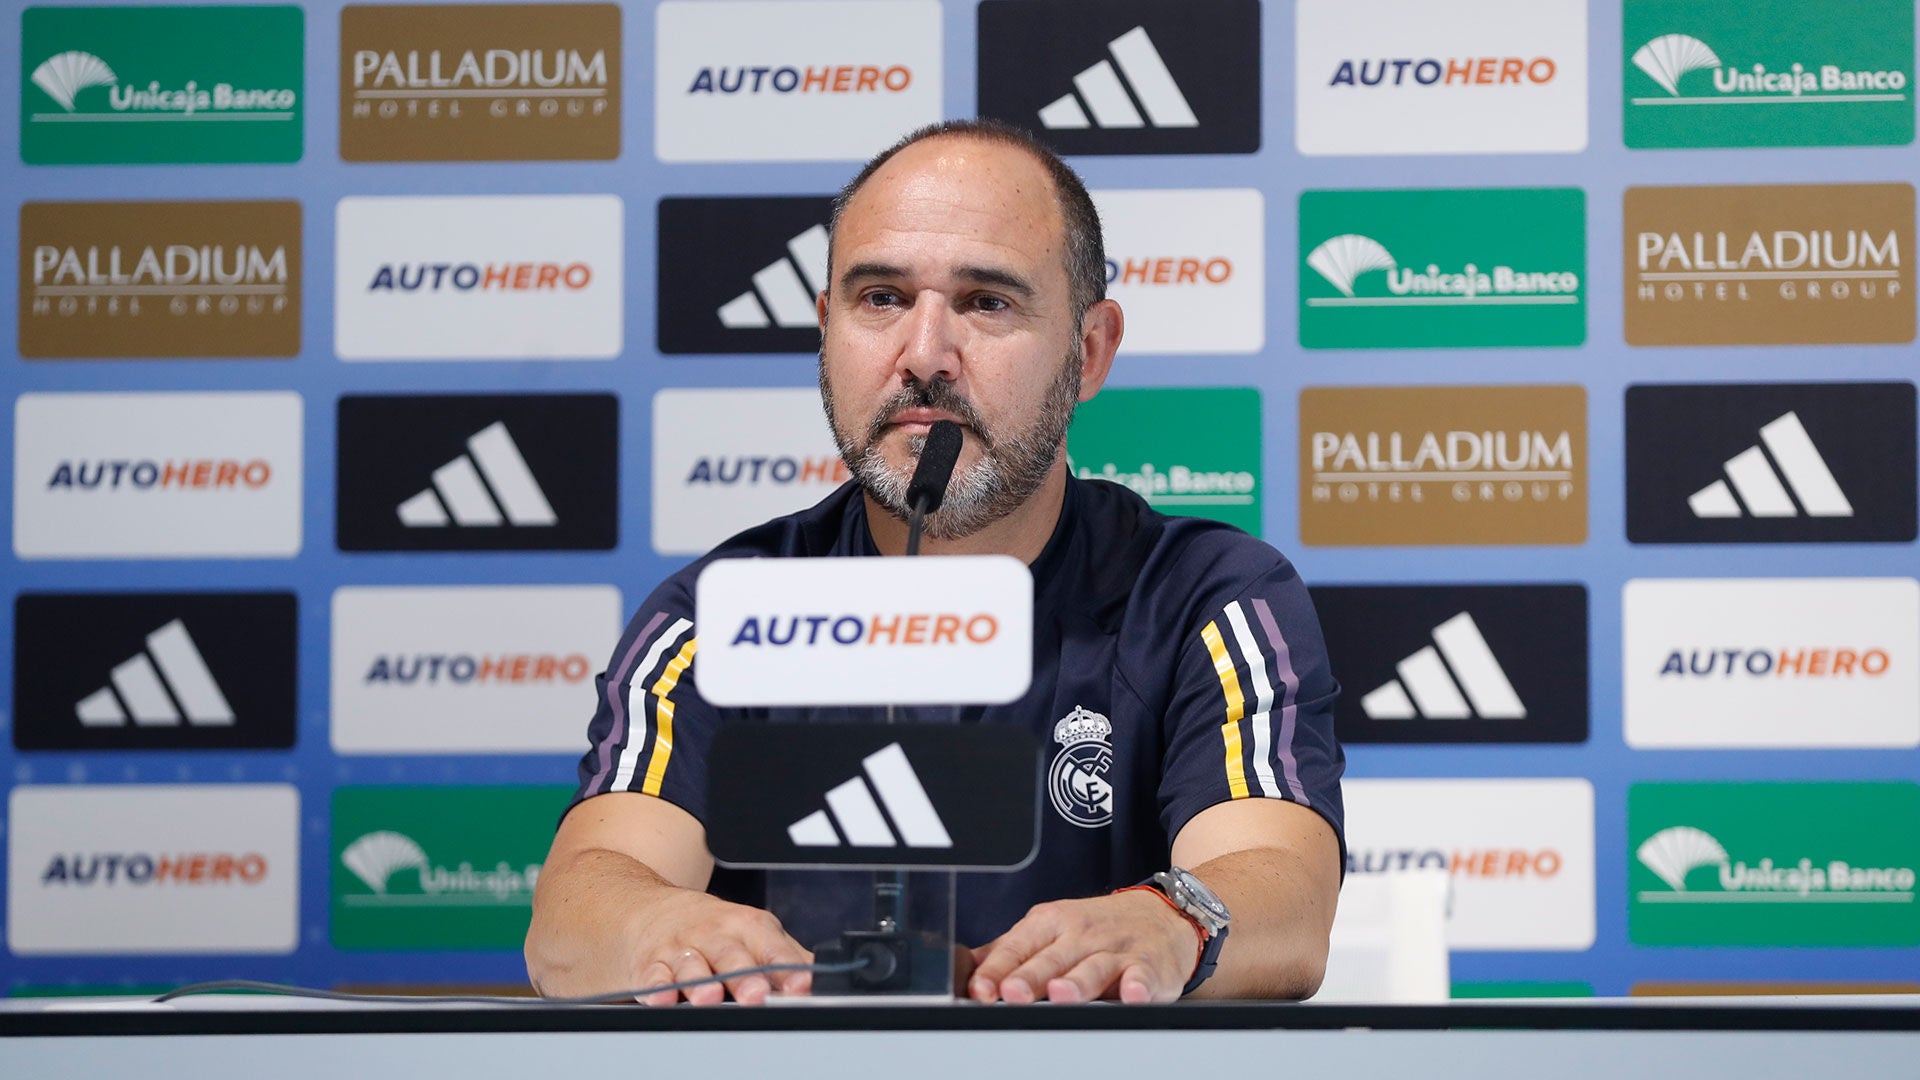 Chus Mateo: “We have four games left in the Regular Season and we can't afford to lose sight of this competition”